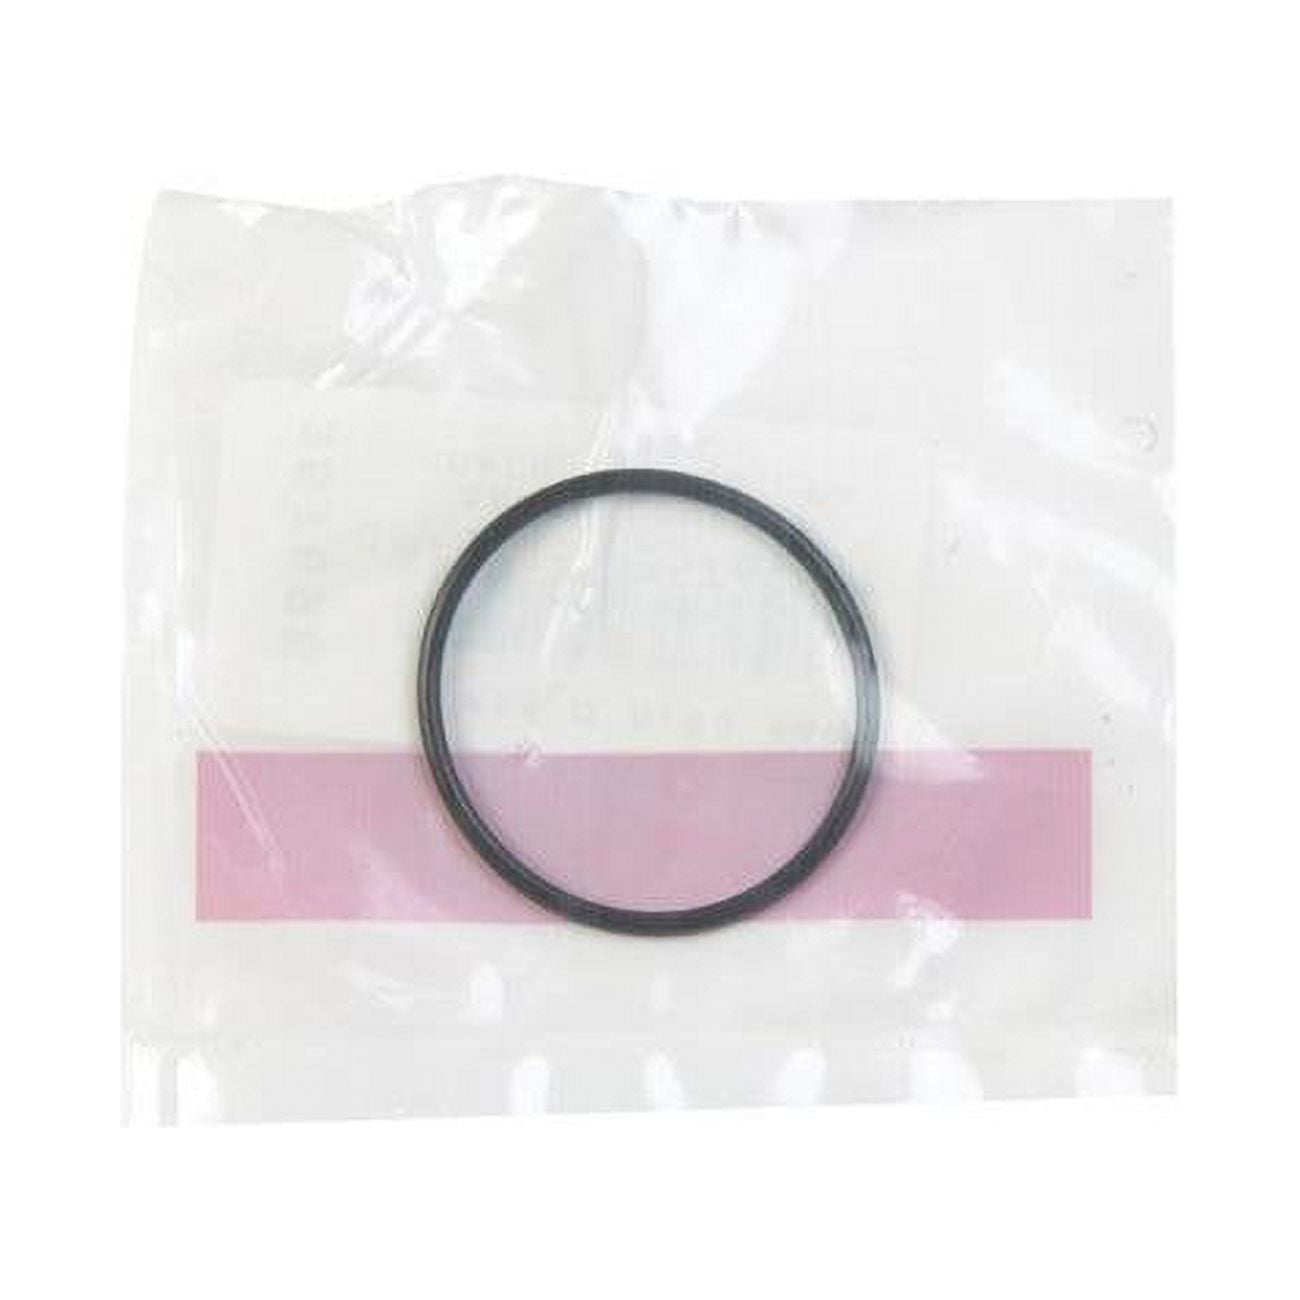 35769b 1.31 X 1.18 In. O Ring- Pack Of 5